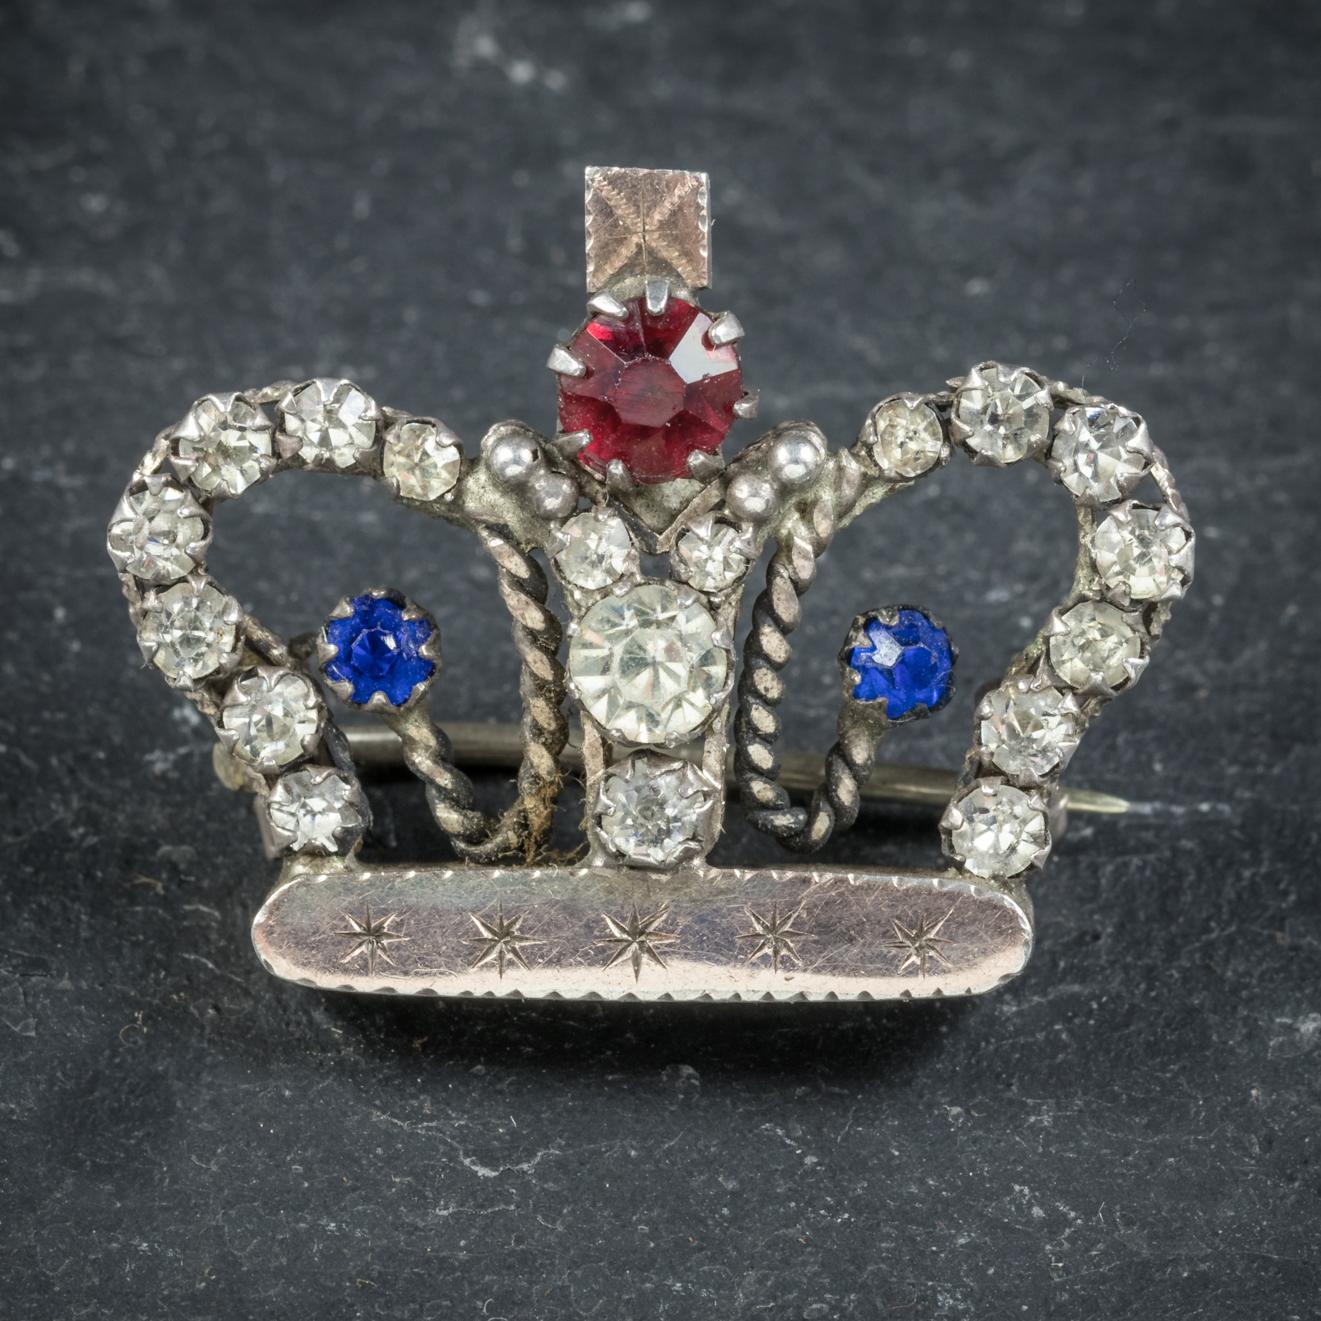 This delightful antique crown brooch is Victorian, Circa 1900.

The fabulous little crown is adorned with bright red, white and blue Paste Stones that simulate Rubies, Sapphires and Diamonds.

Beautifully made from white Metal and Silver with a Gold